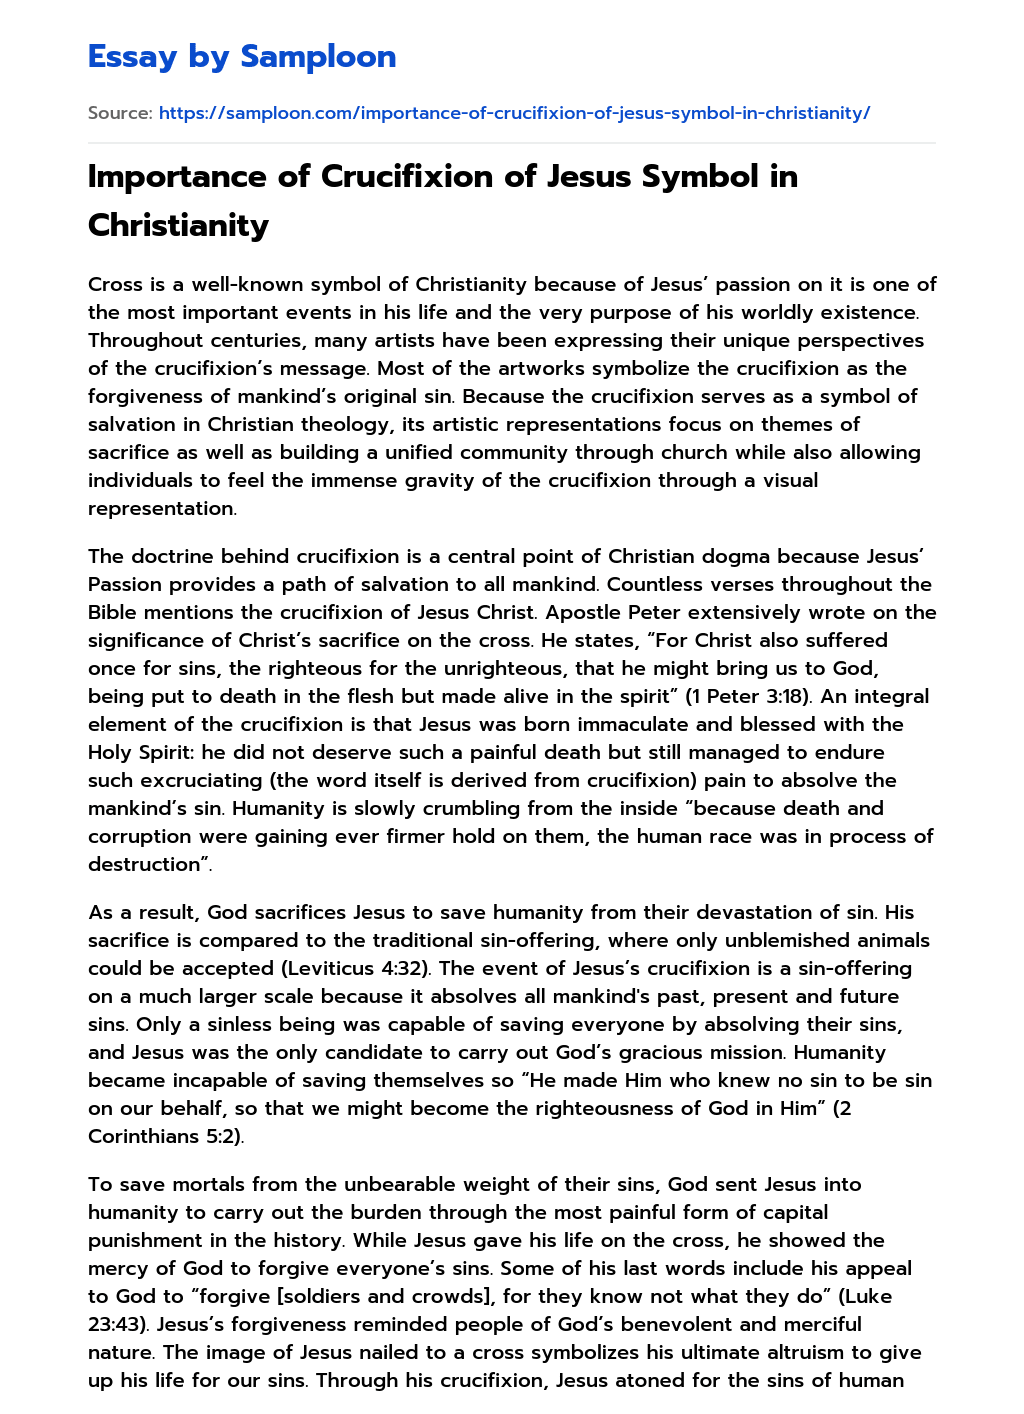 christianity essay examples